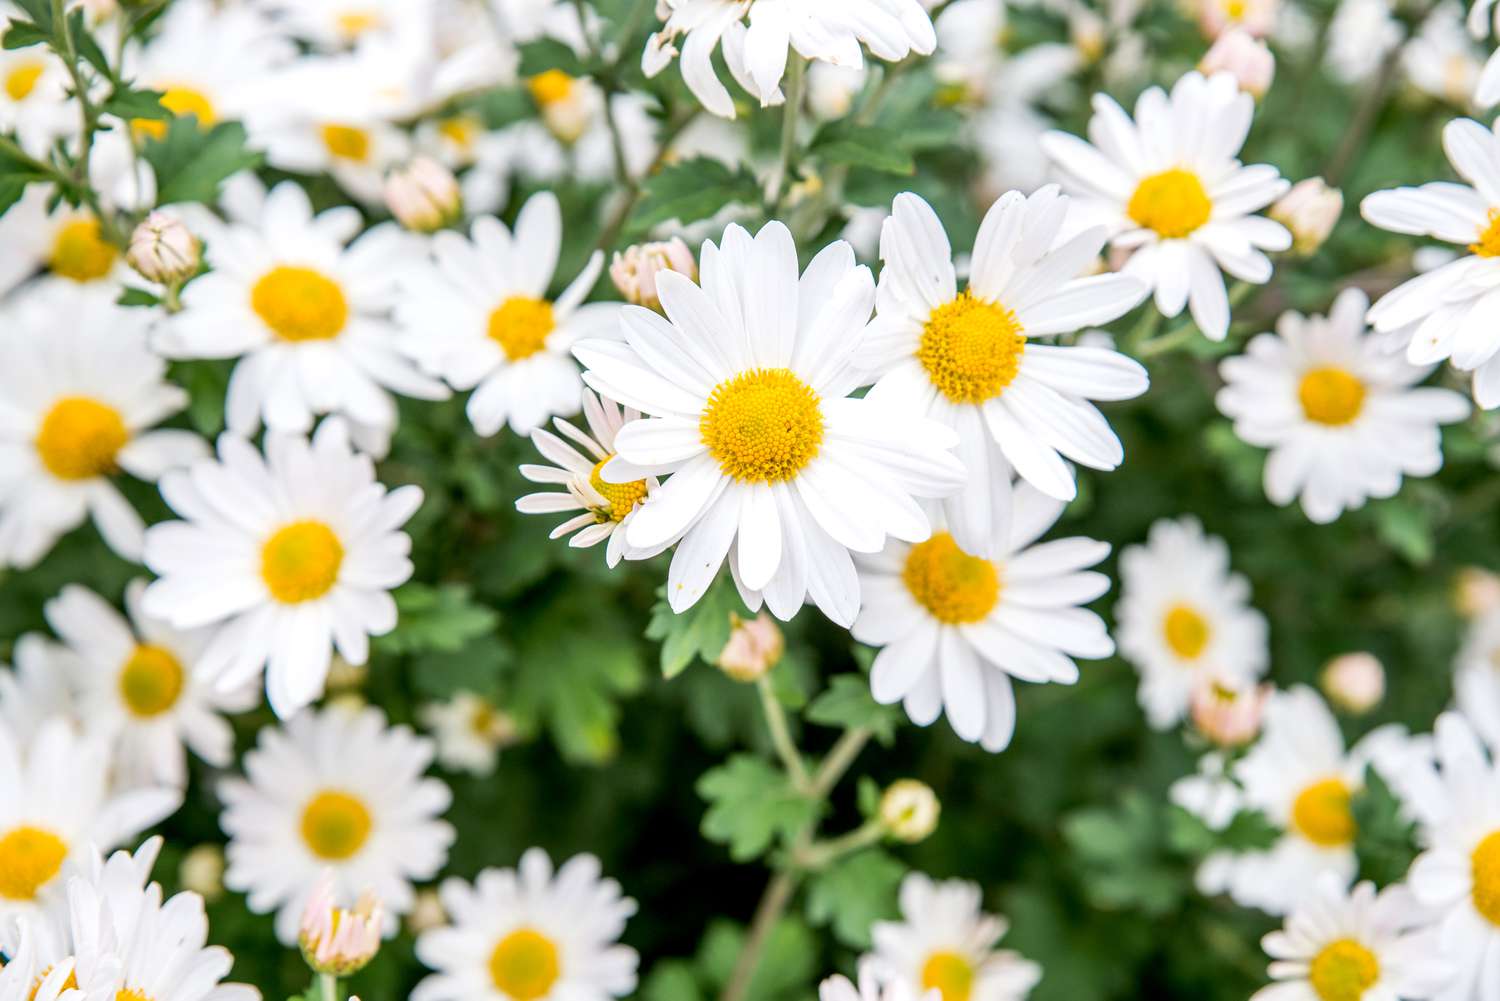 Daisy Dreams: Enhancing Your Screen with 5120x1440p 329 Daisies Backgrounds